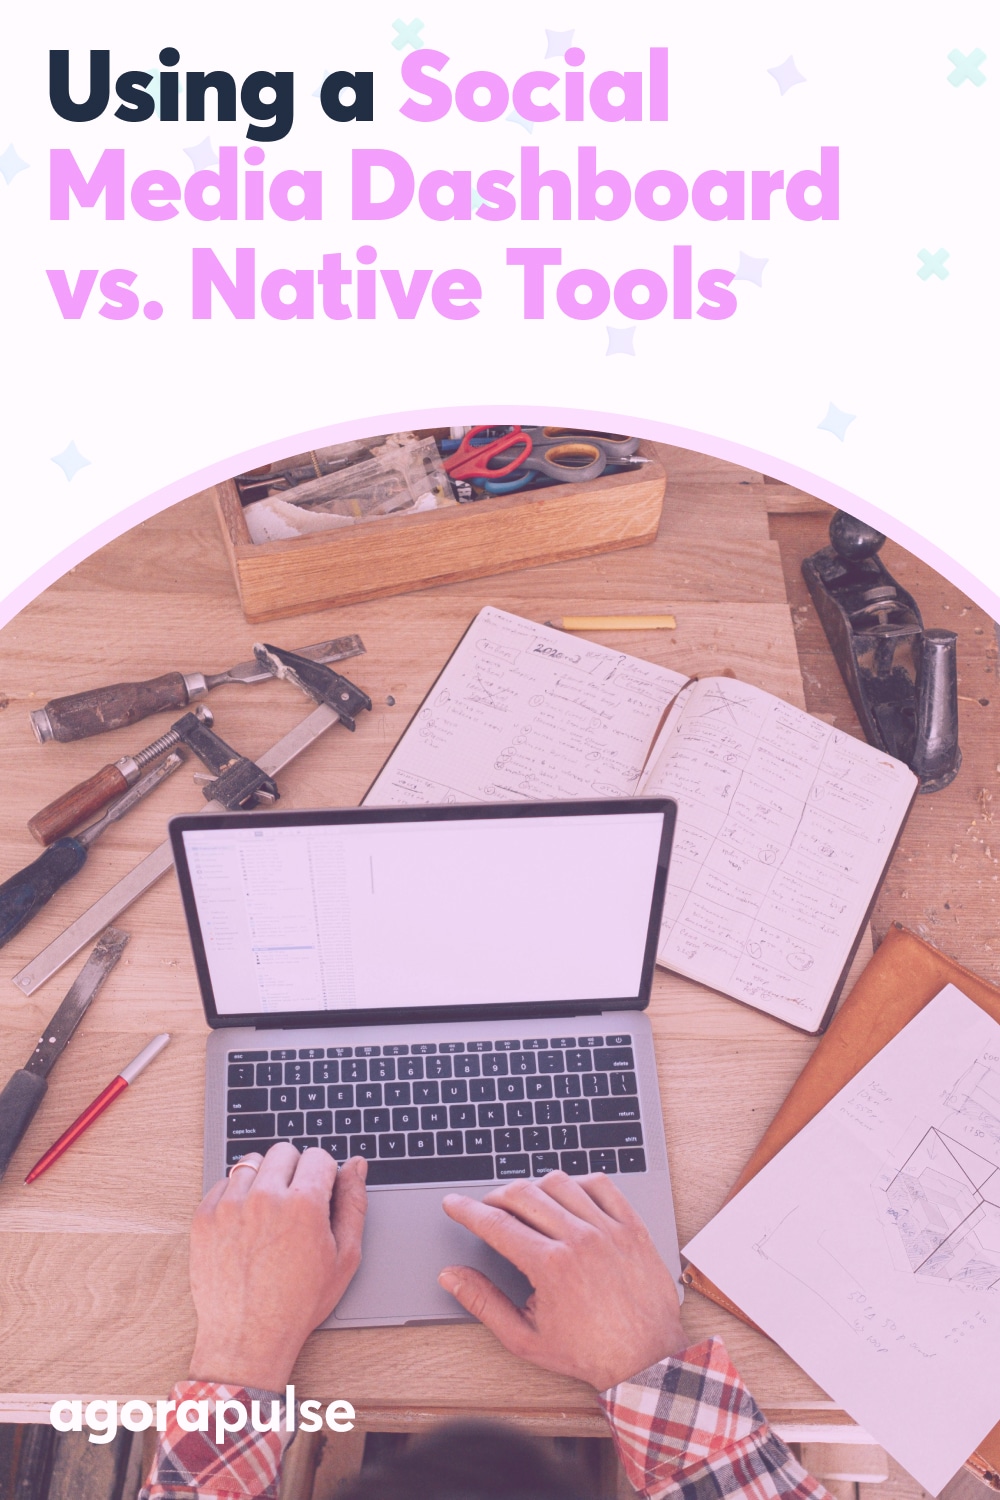 Why Choose a Social Media Management Tool Over a Native Tool?